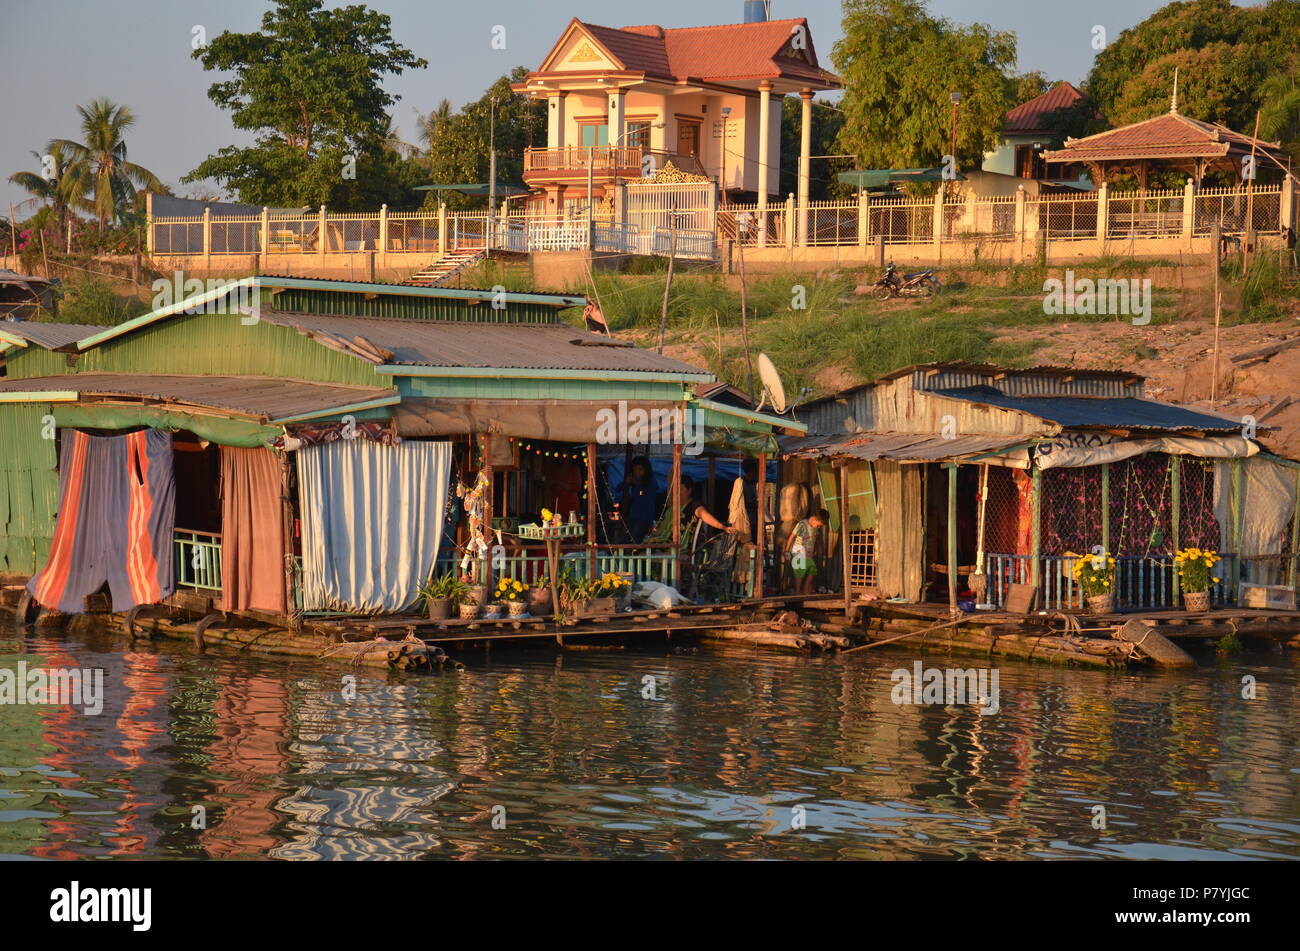 House on water in cambodia Stock Photo